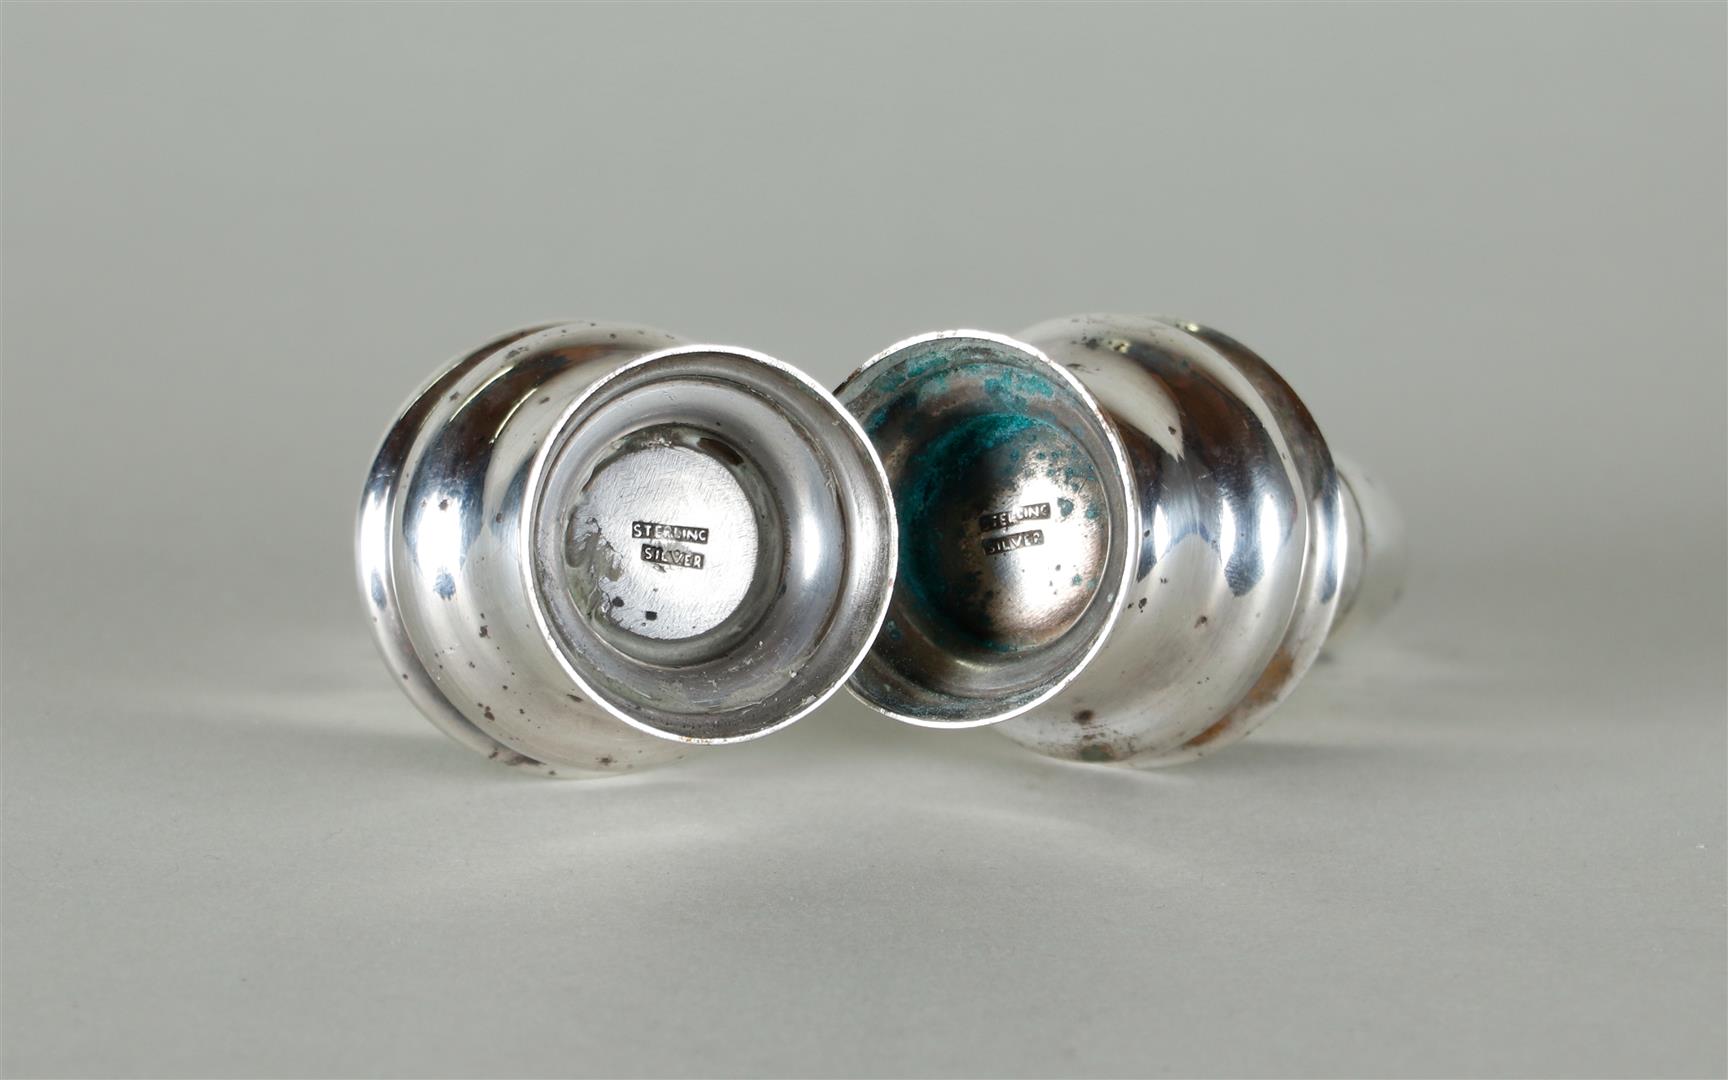 A Sterluing silver salt and pepper shaker - Image 2 of 3